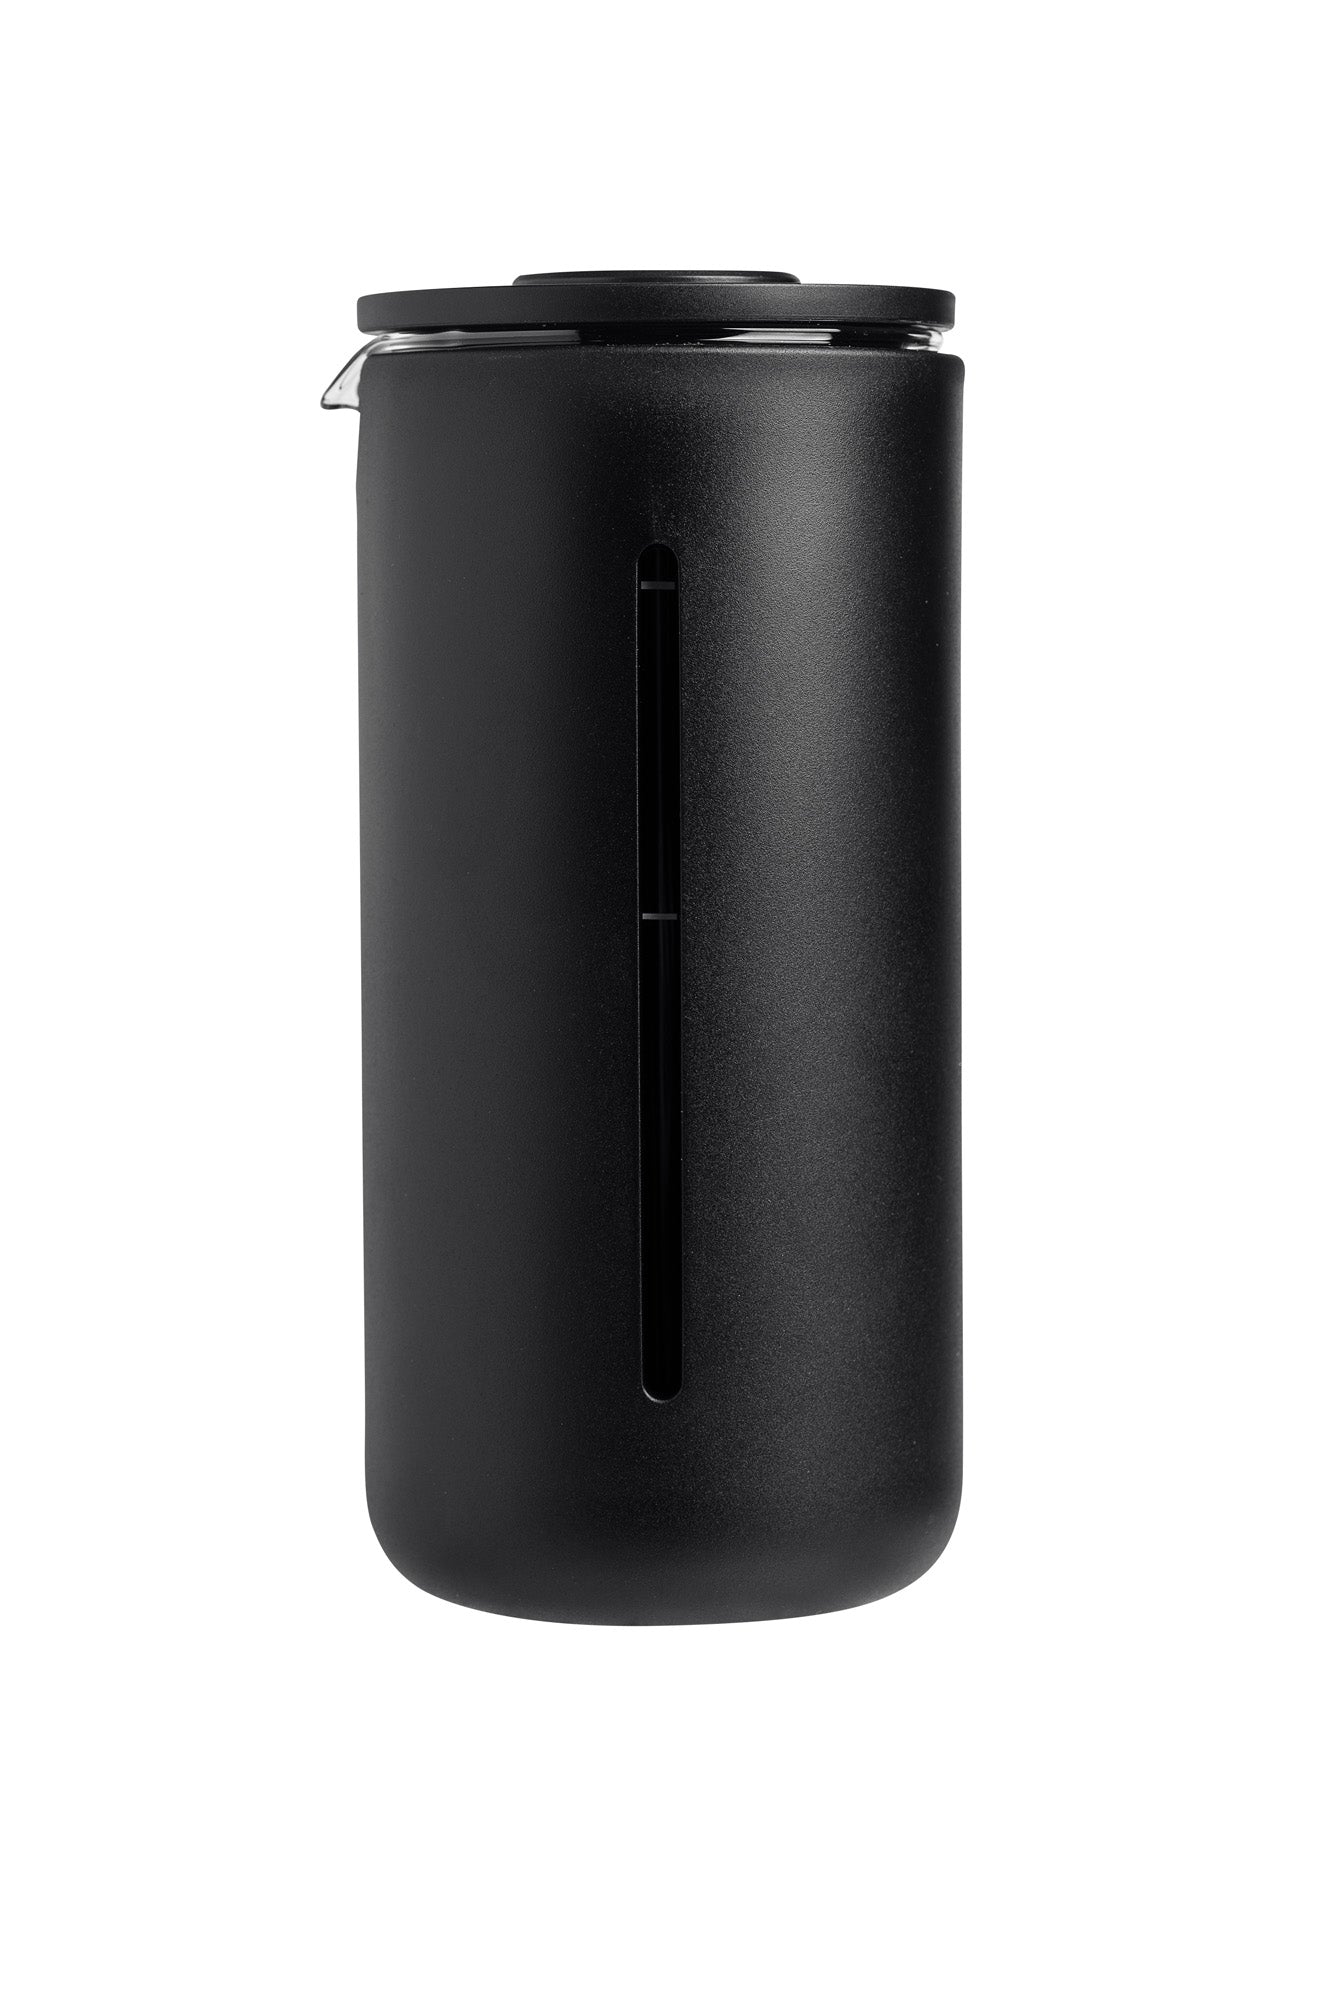 Small U French Press Plunger (2-3 cup) Black